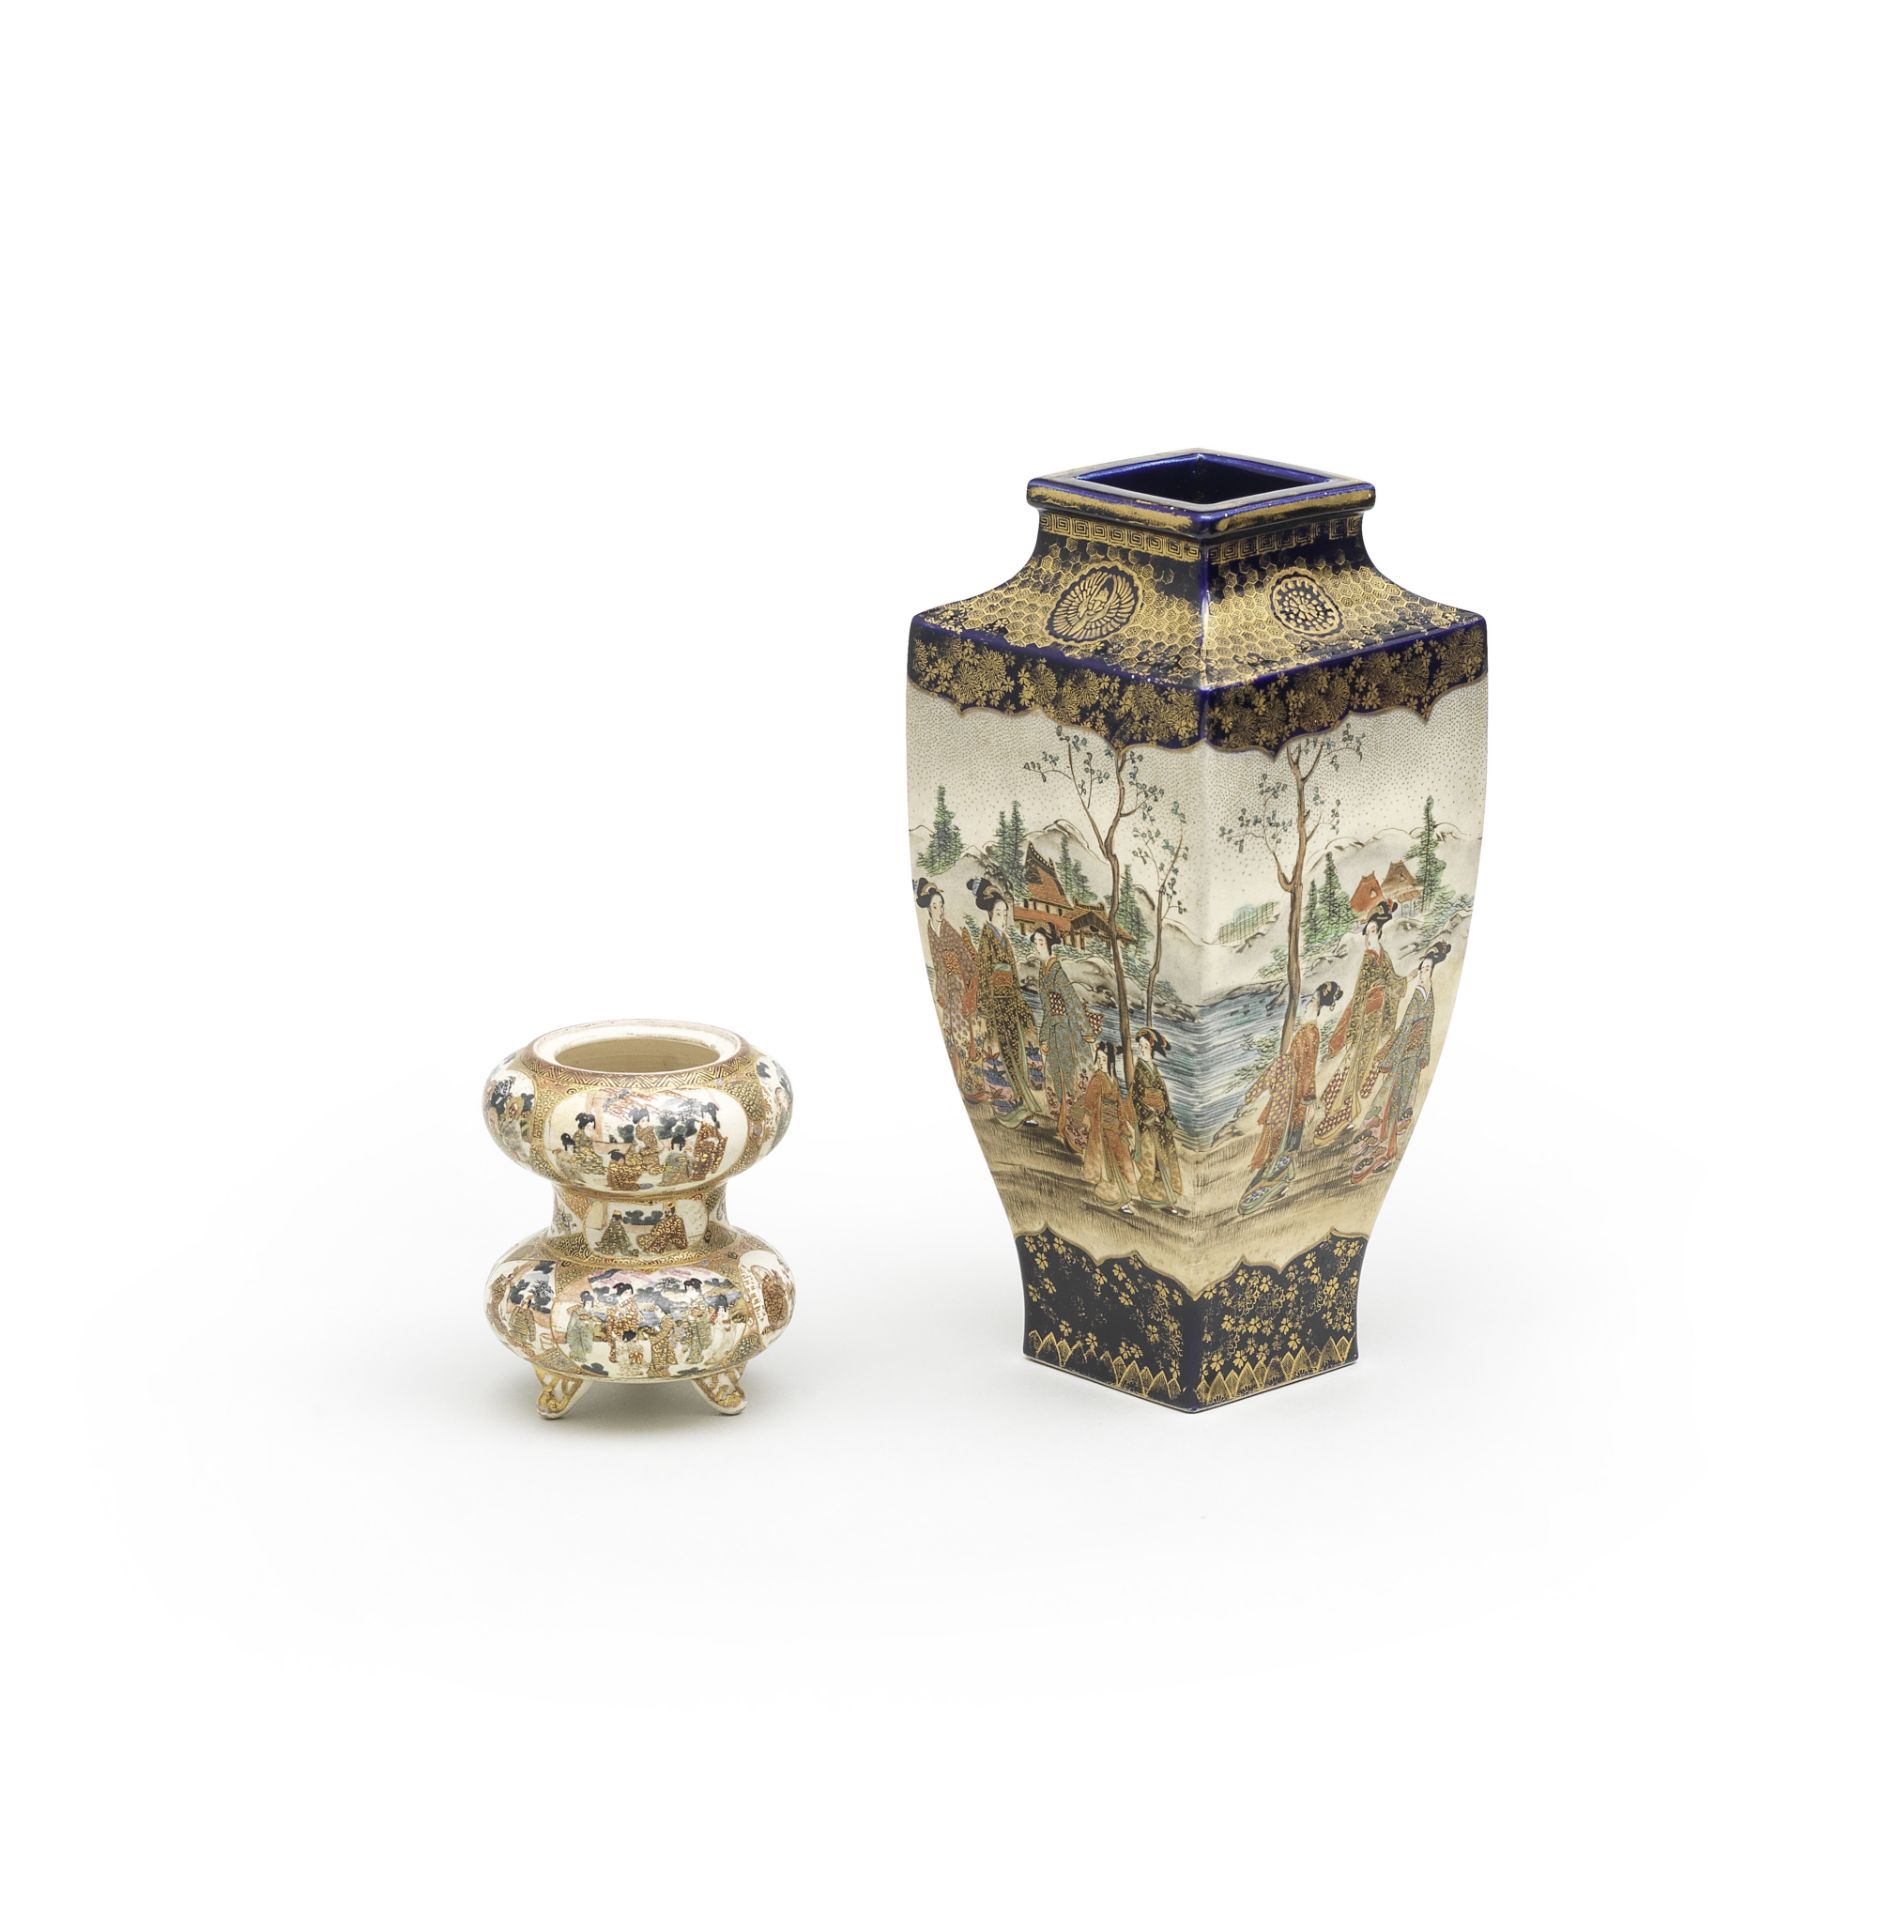 A SATSUMA-WARE SQUARE BALUSTER VASE AND A DOUBLE-GOURD VASE The first by Chikusai, the second by...